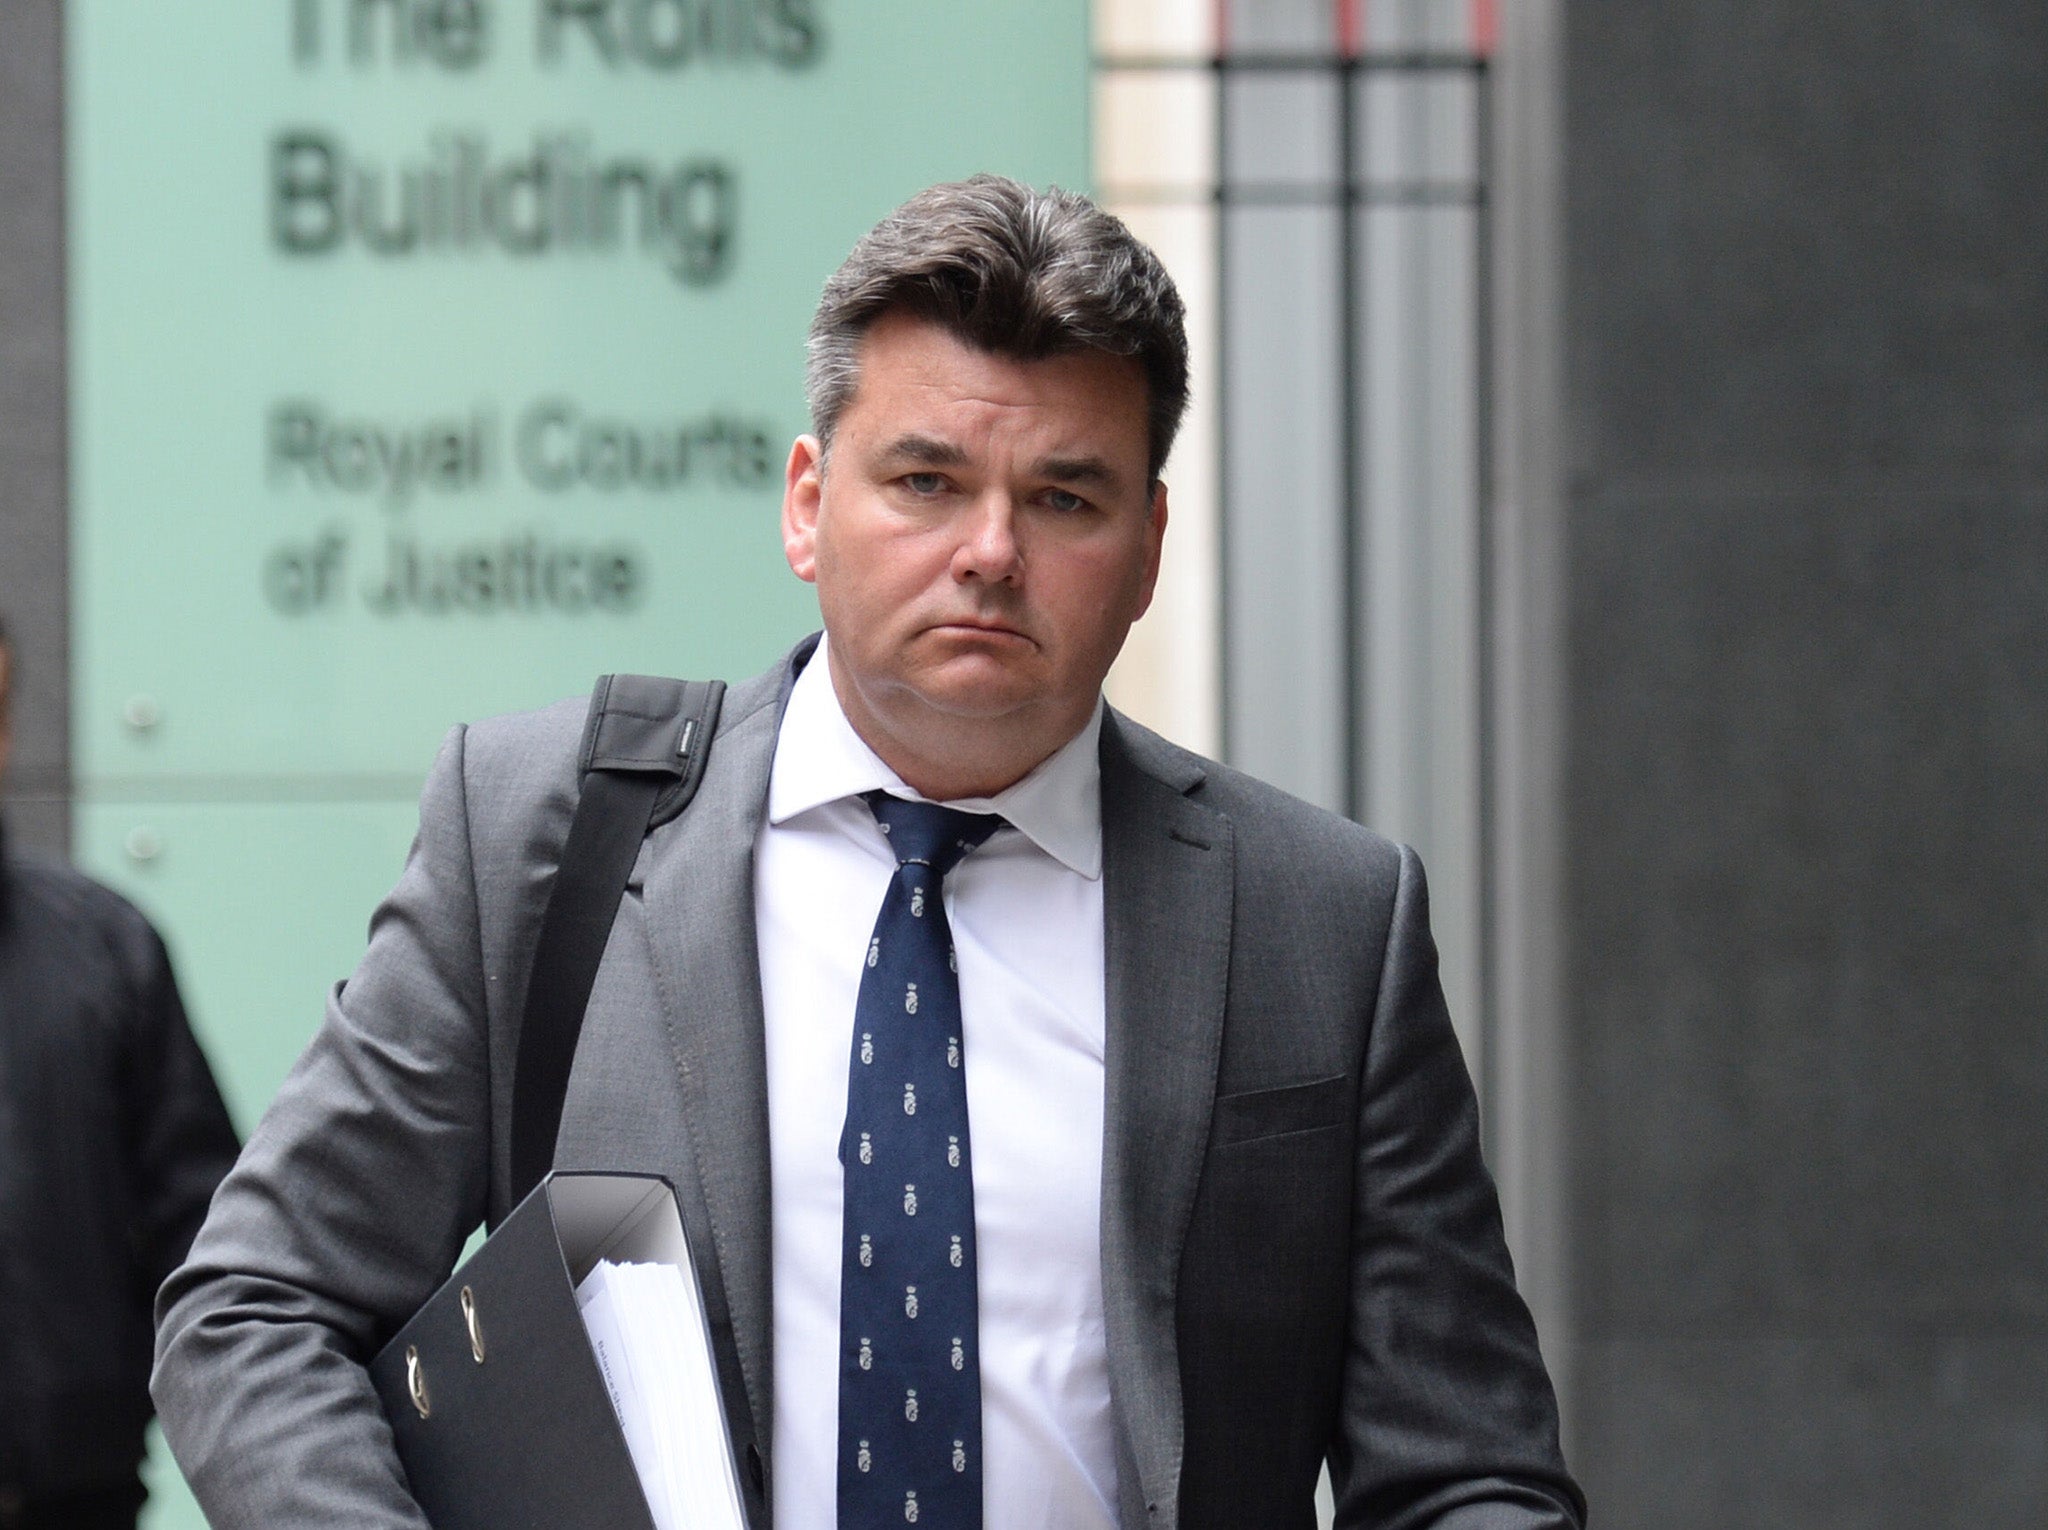 Dominic Chappell: The former BHS owner is facing prosecution